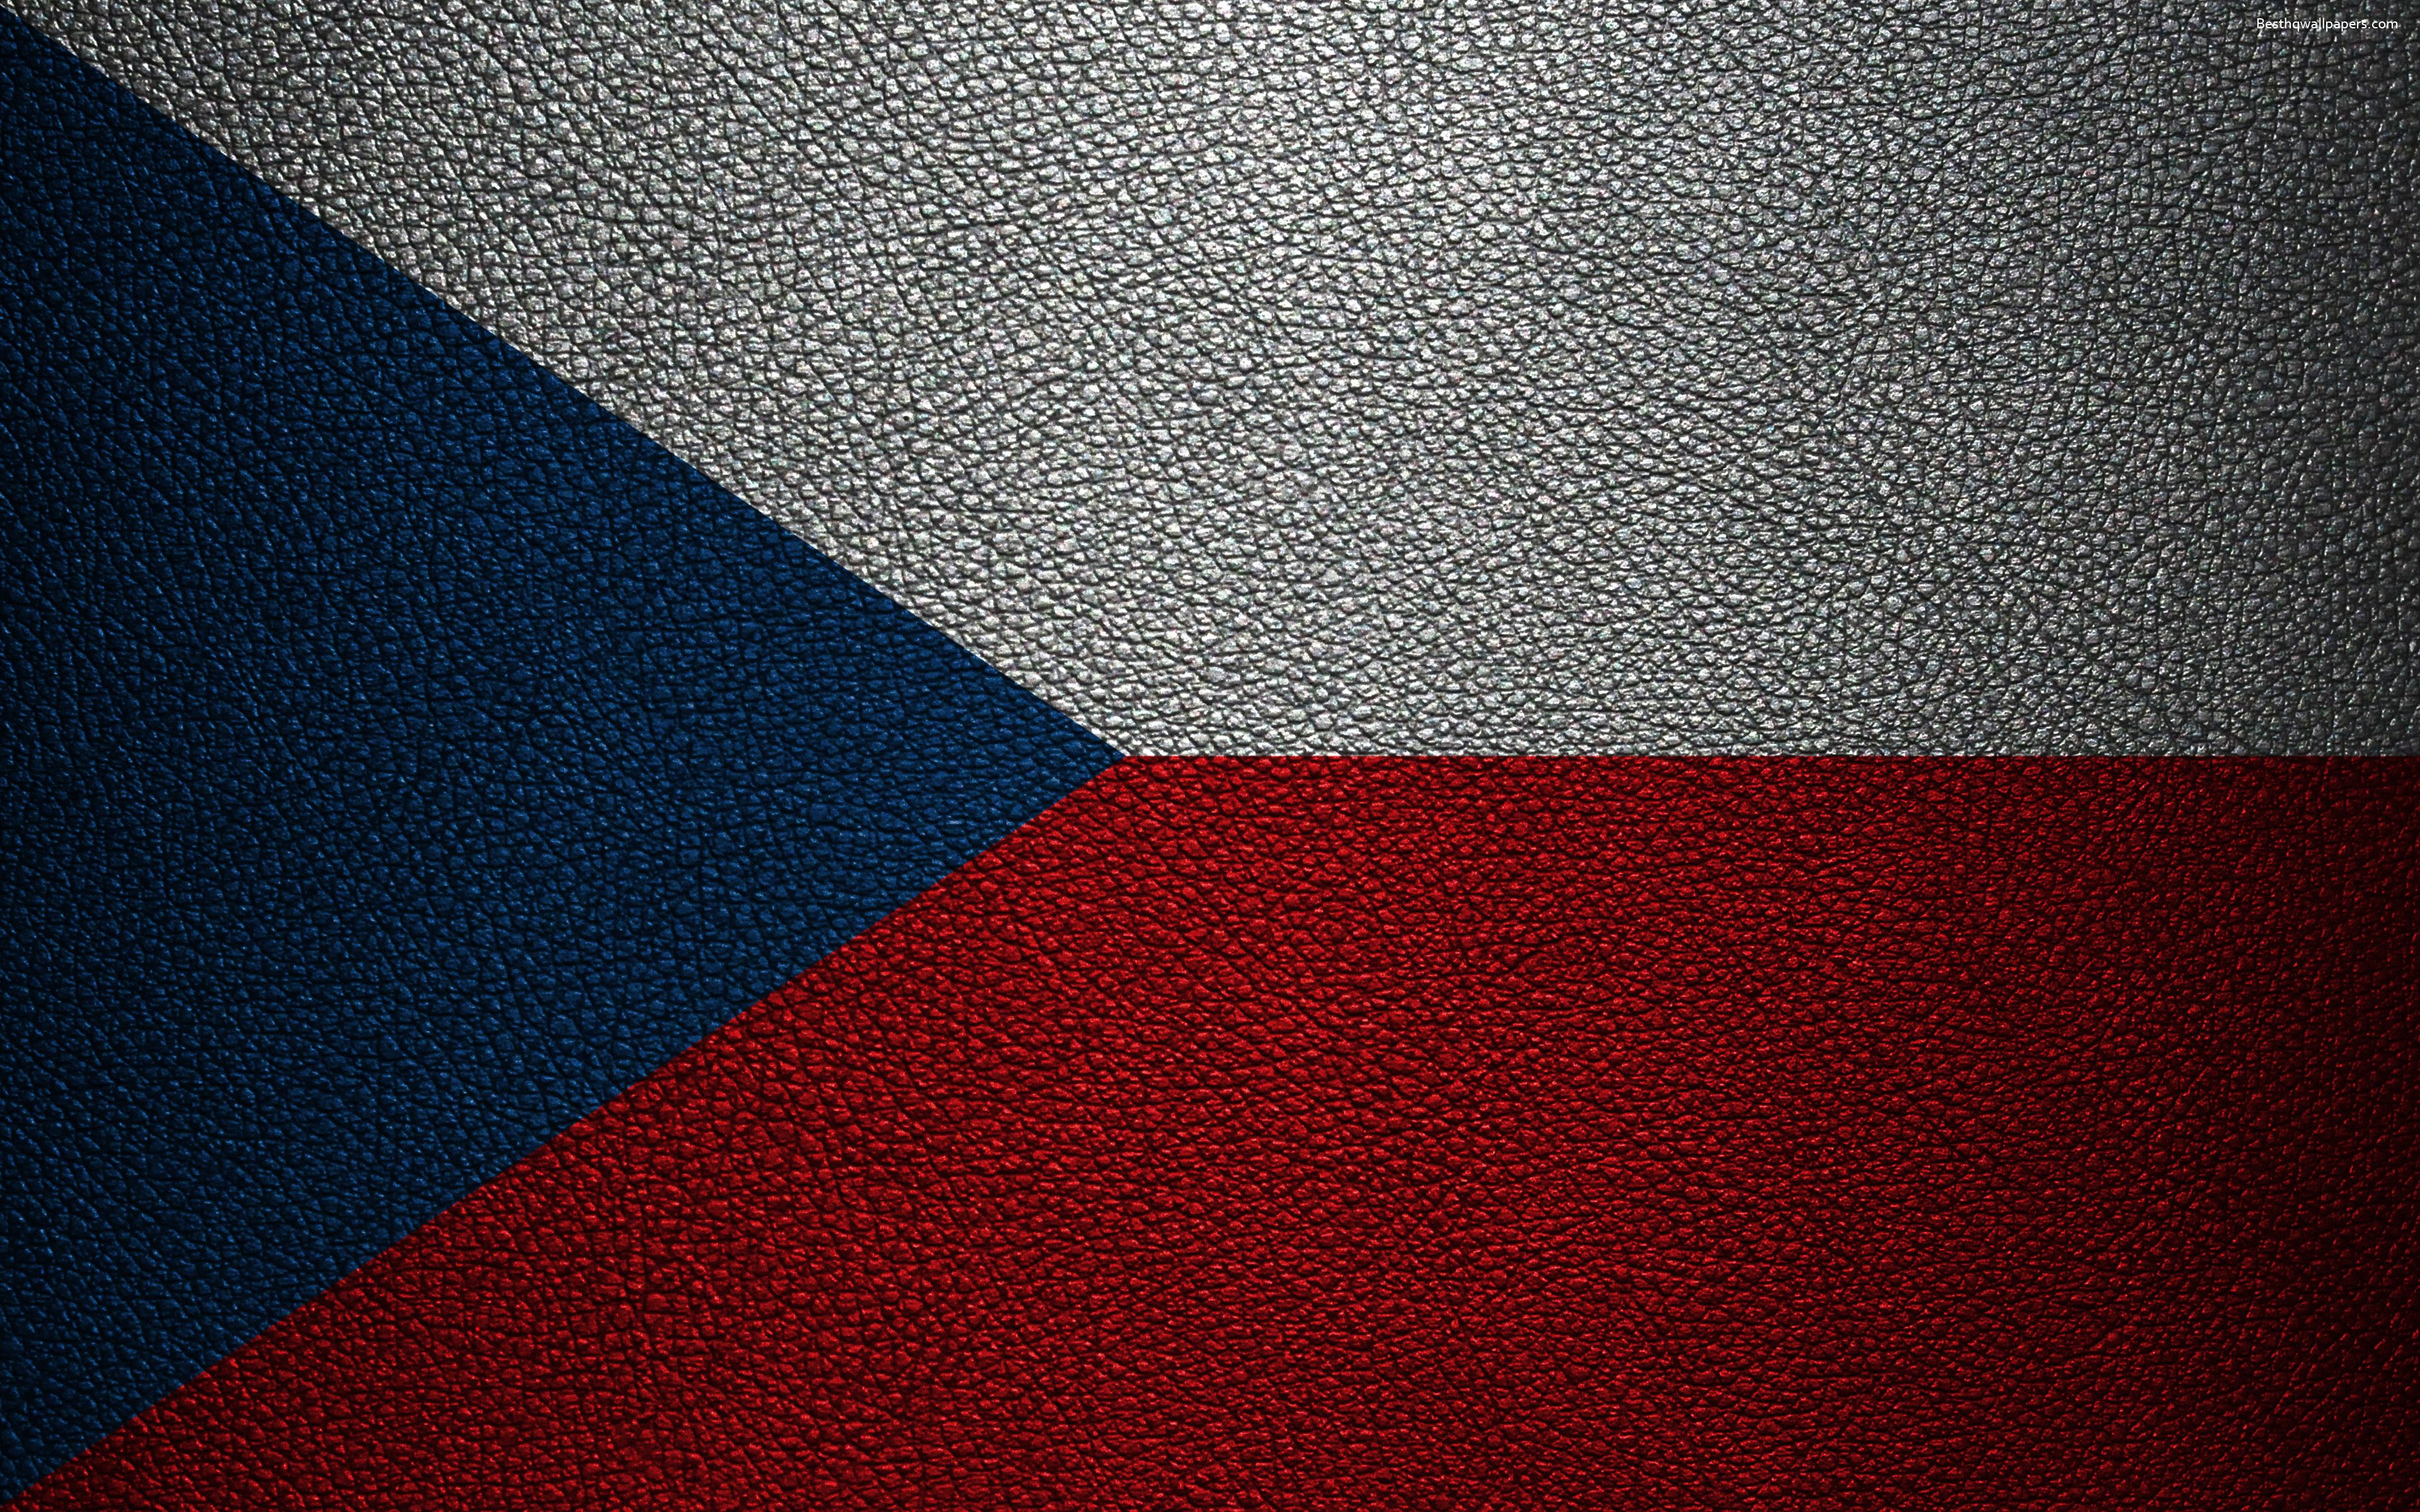 Download wallpaper Flag of Czech Republic, 4k, leather texture, Czech flag, Europe, flags of Europe, Czech Republic for desktop with resolution 3840x2400. High Quality HD picture wallpaper